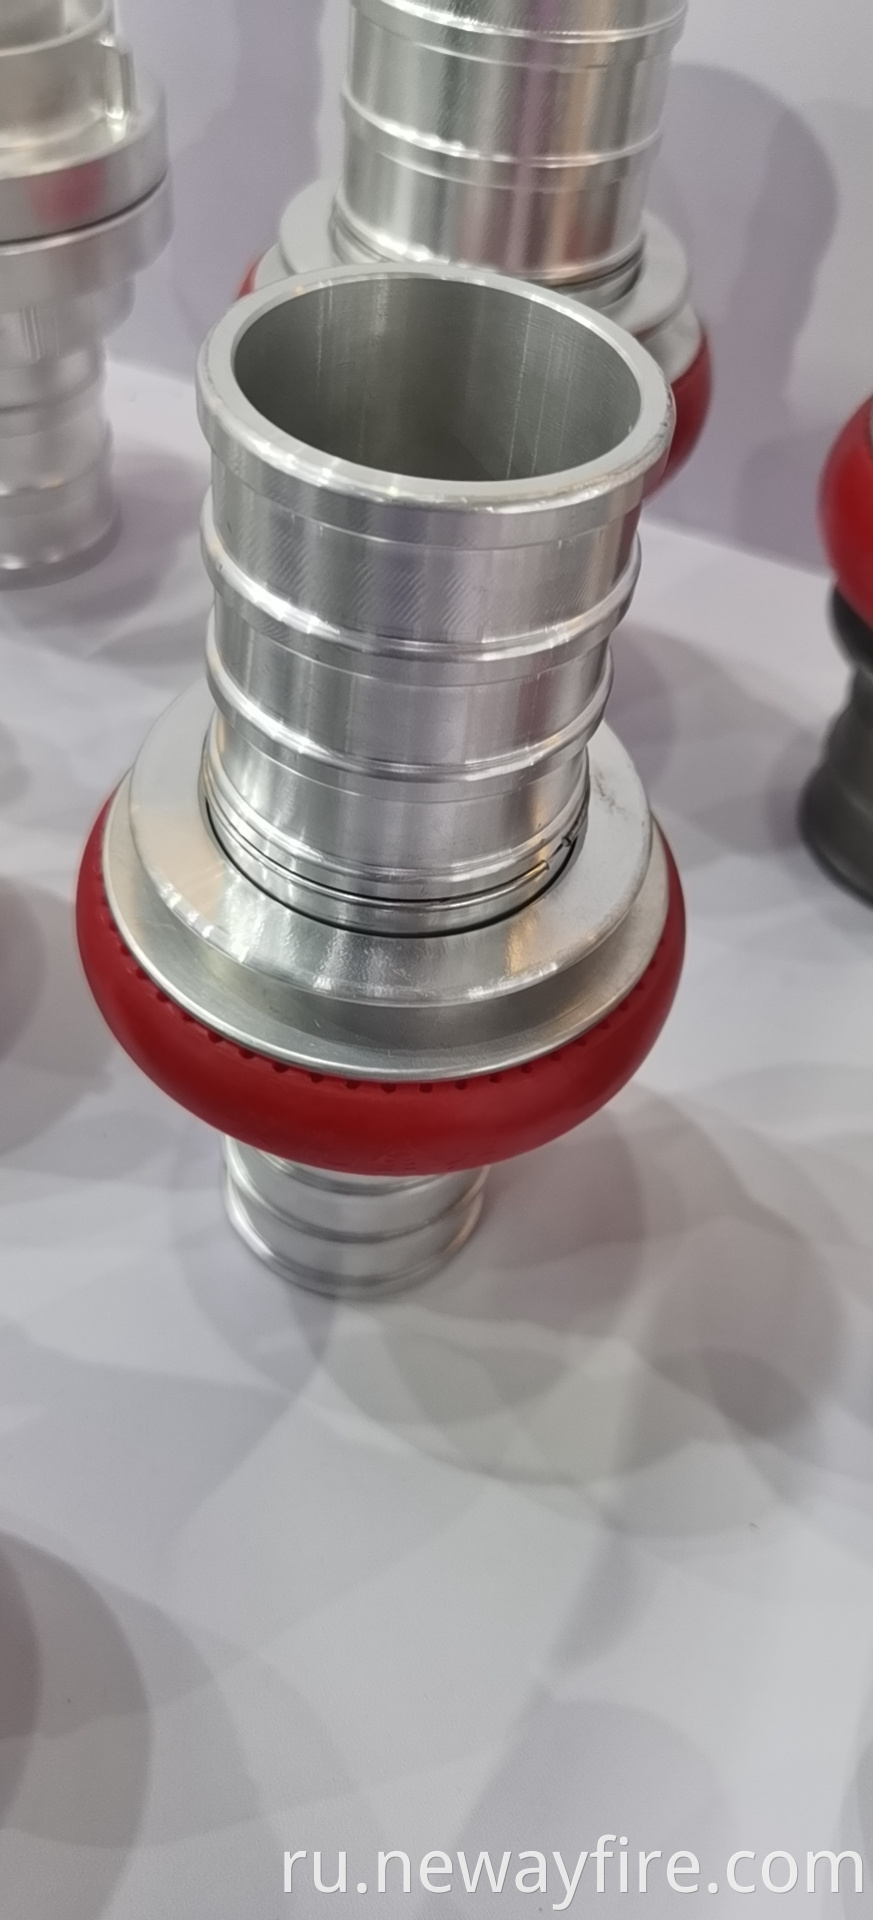 38mm Fire Hose Delivery Coupling Forged